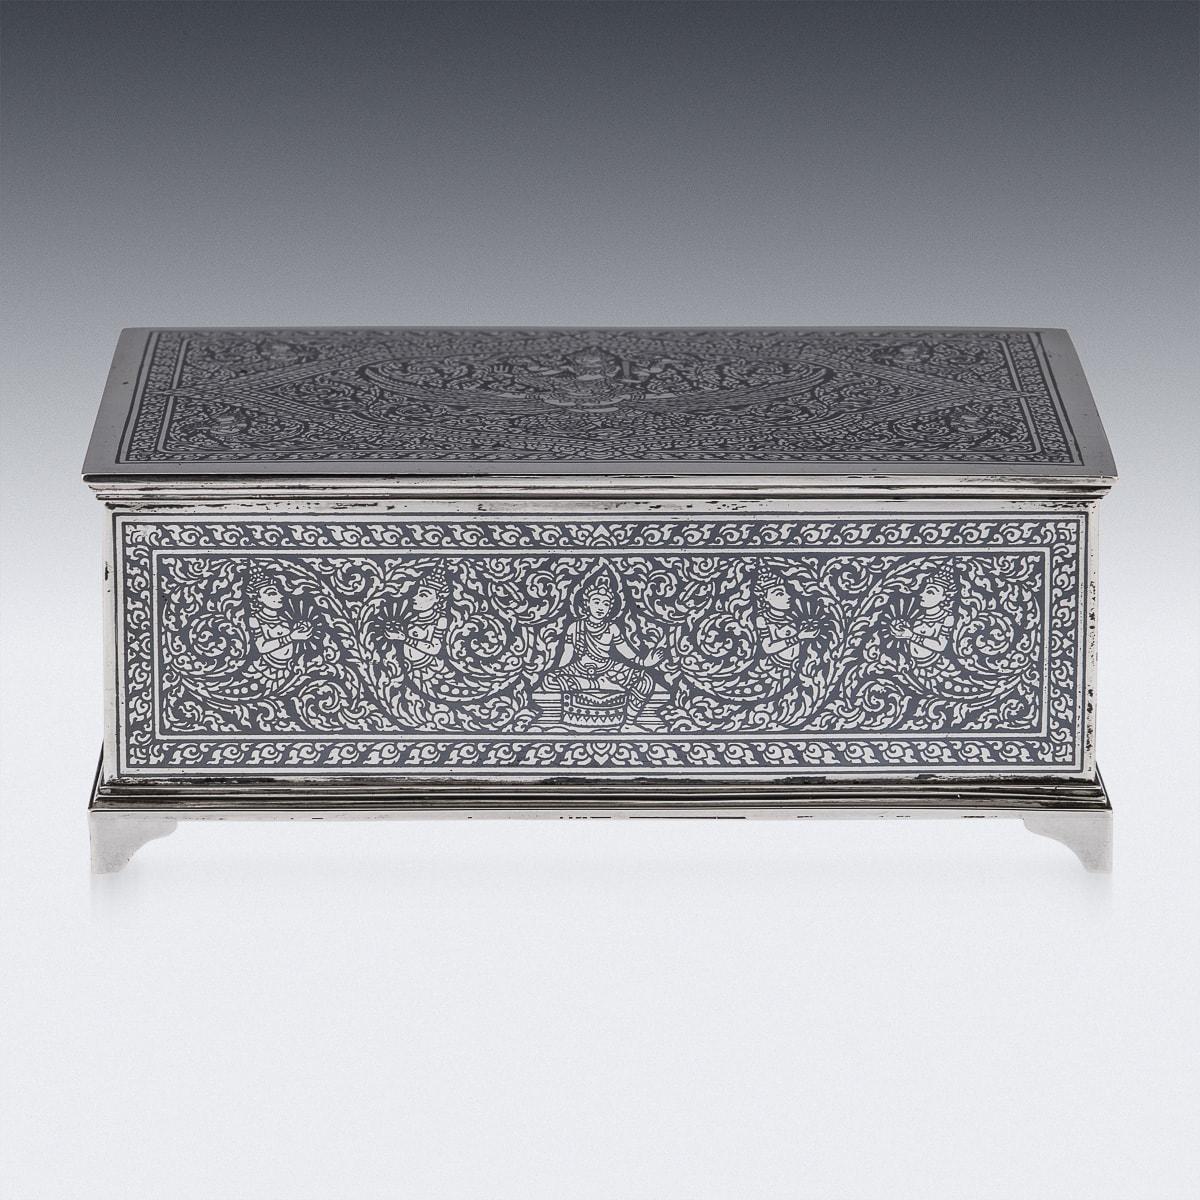 Beautiful mid-20th Century Thai solid silver niello box, decorated throughout with stylised leaves and deities on polished ground, standing on four shaped feet. Tested Sterling (925+ standard), Makers Unknown, probably made in Bangkok. Nielloware